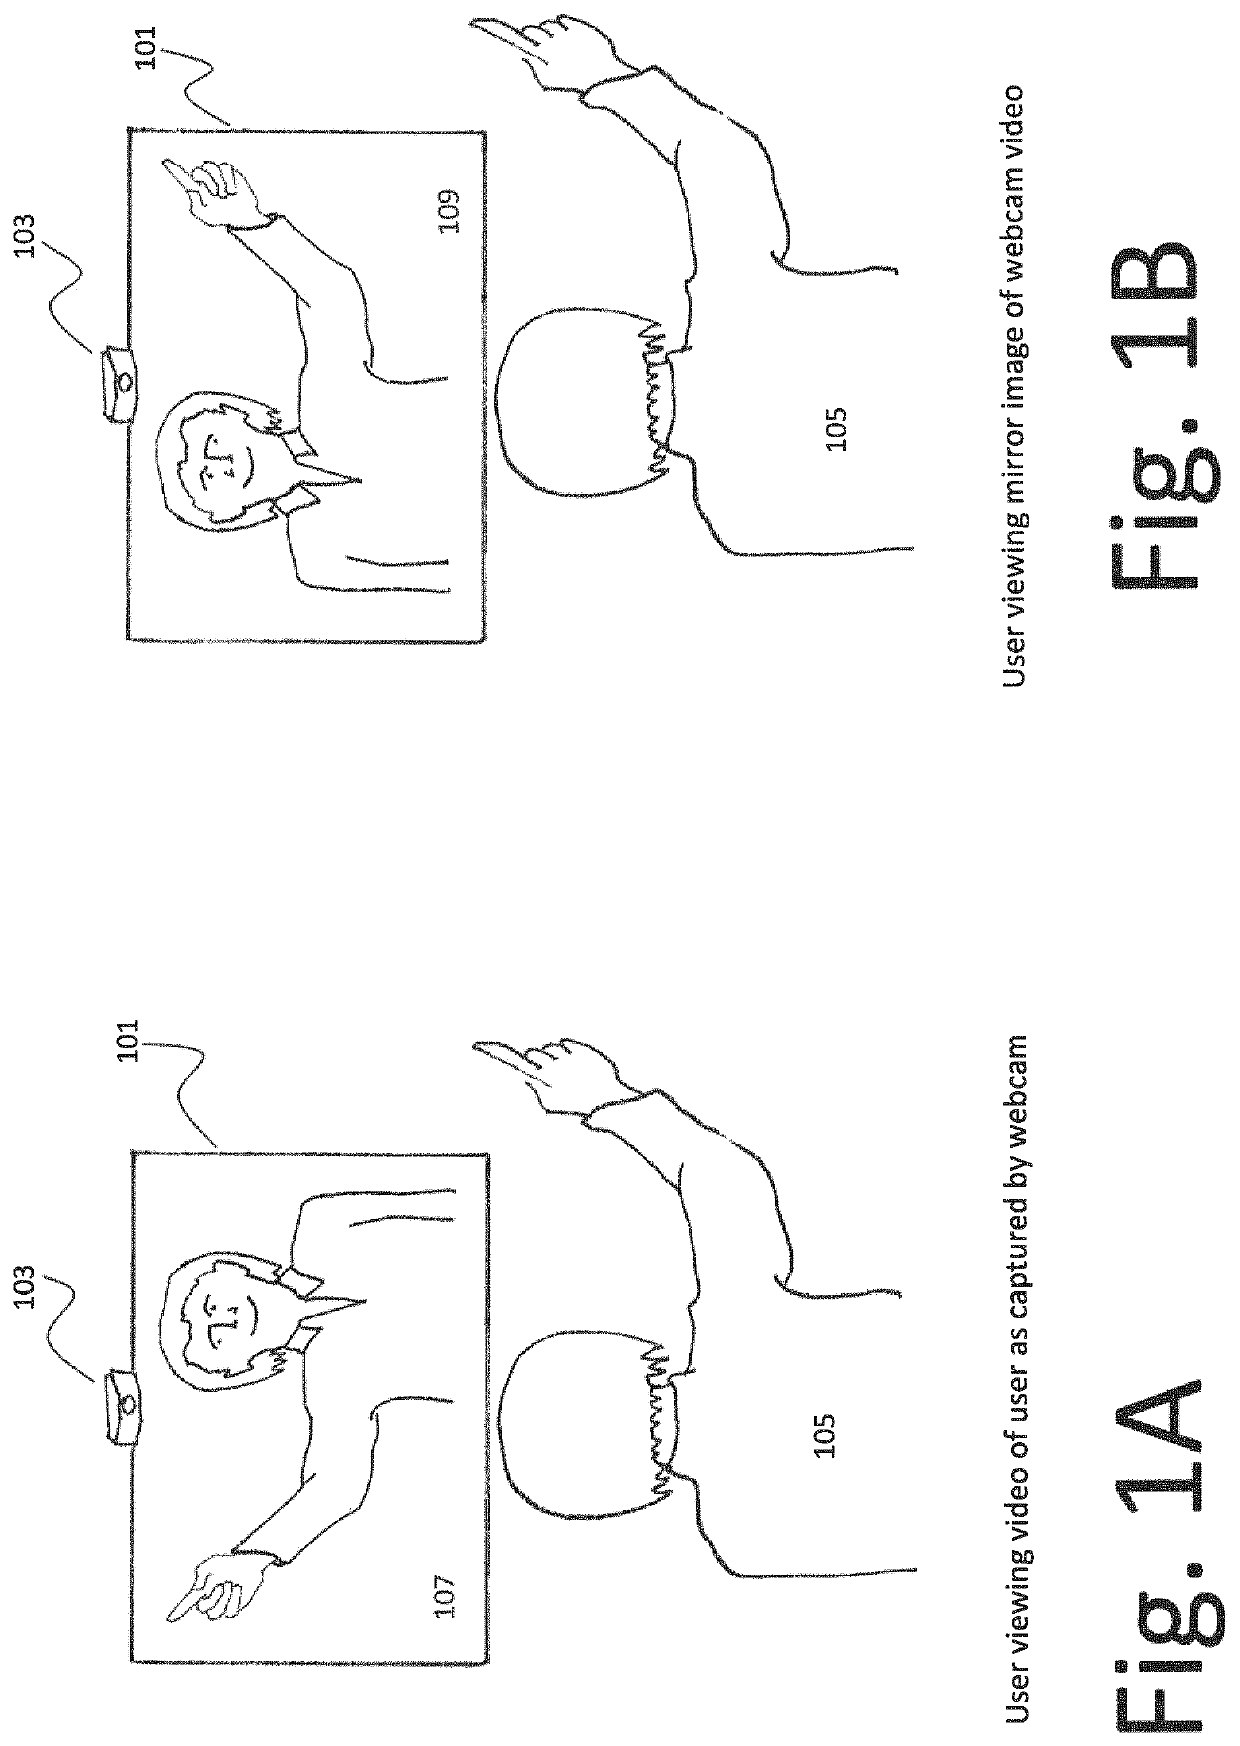 Method and apparatus for repositioning meeting participants within a gallery view in an online meeting user interface based on gestures made by the meeting participants